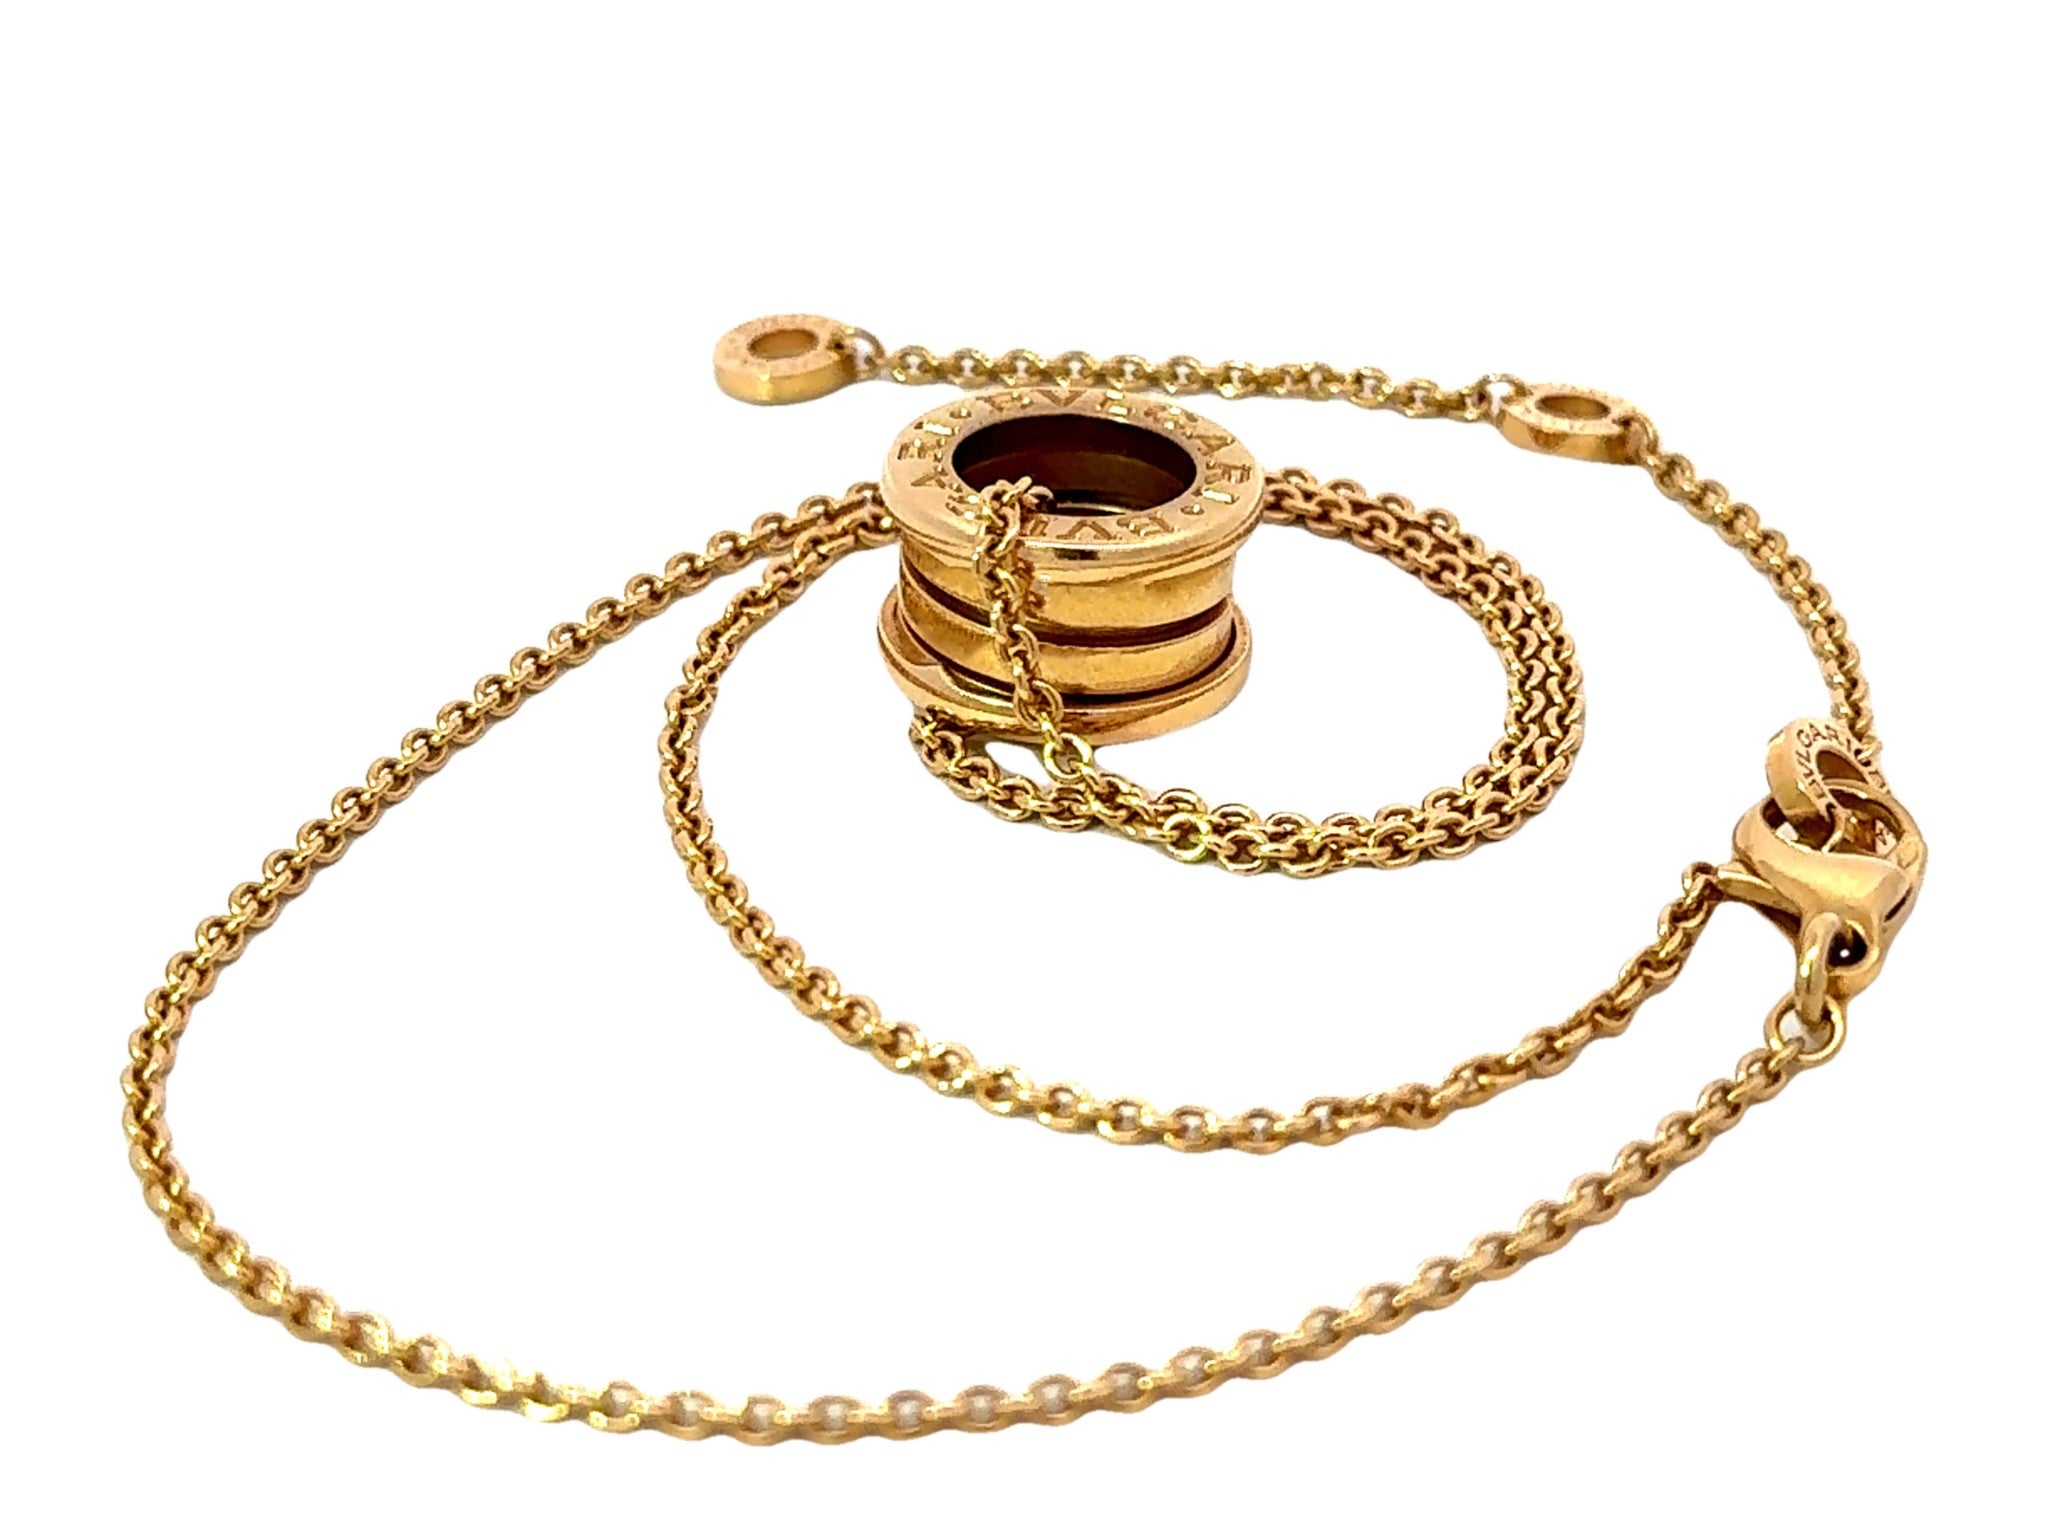 BVLGARI B.ZERO1 Necklace 18k Yellow Gold With Box and Papers